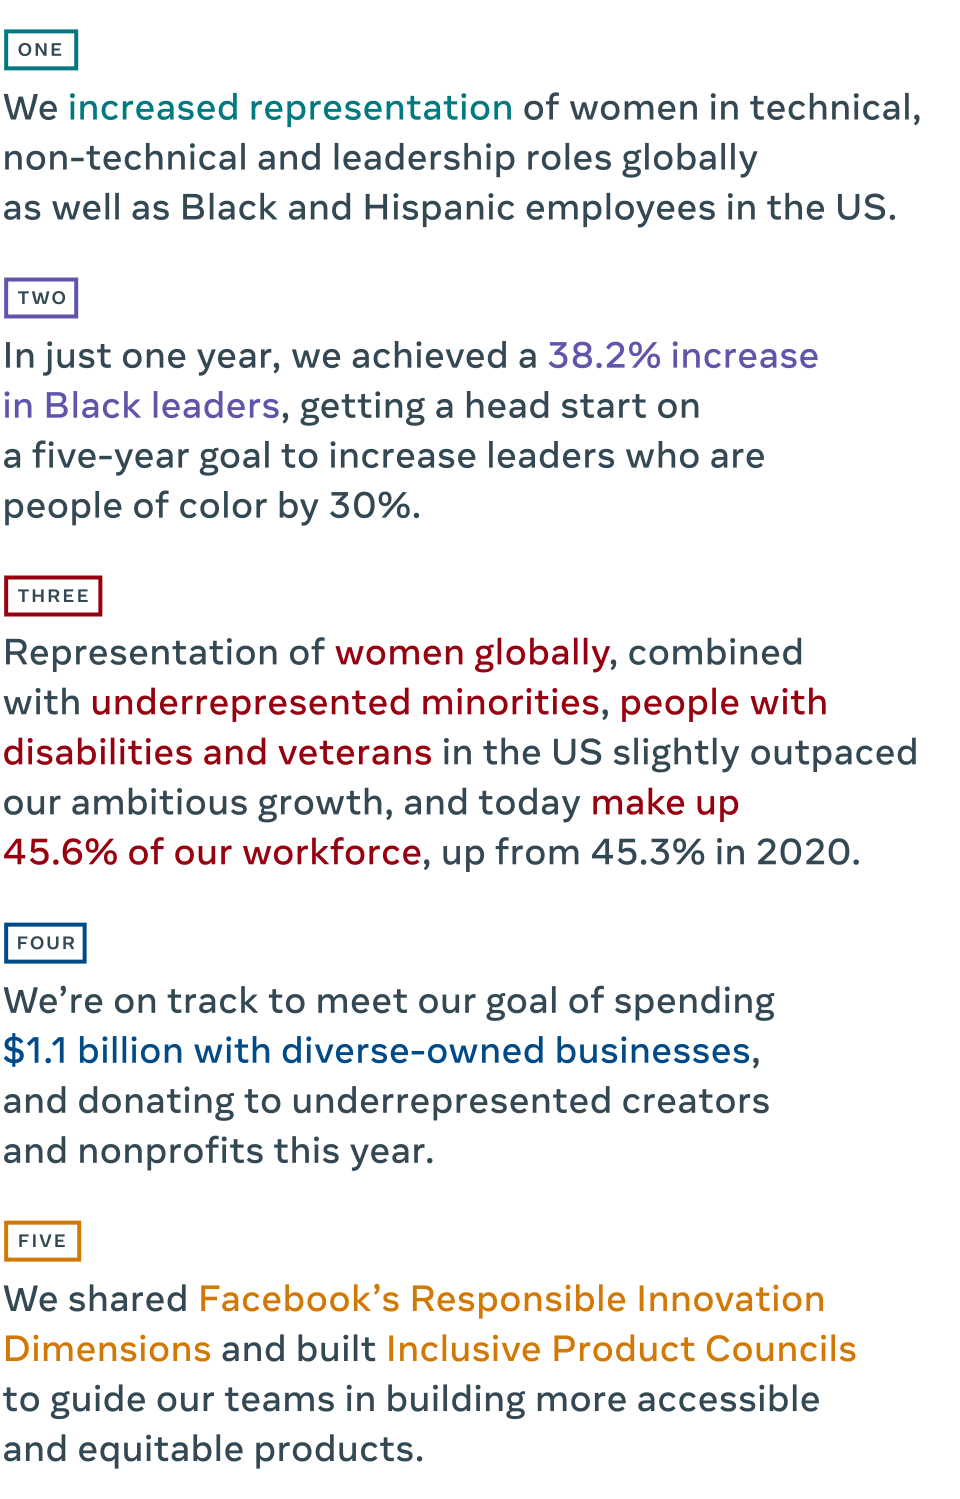 1) We increased representation of women in technical, non-technical and leadership roles globally as well as Black and Hispanic employees in the US. 2) In just one year, we achieved a 38.2% increase in Black leaders, getting a head start on a five-year goal to increase leaders who are people of color by 30%. 3) Representation of women globally, combined with underrepresented minorities, people with disabilities and veterans in the US slightly outpaced our ambitious growth, and today make up 45.6% of our workforce, up from 45.3% in 2020. 4) We’re on track to meet our goal of spending $1.1 billion with diverse-owned businesses, and donating to underrepresented creators and nonprofits this year. 5) We shared Facebook’s Responsible Innovation Dimensions and built Inclusive Product Councils to guide our teams in building more accessible and equitable products.